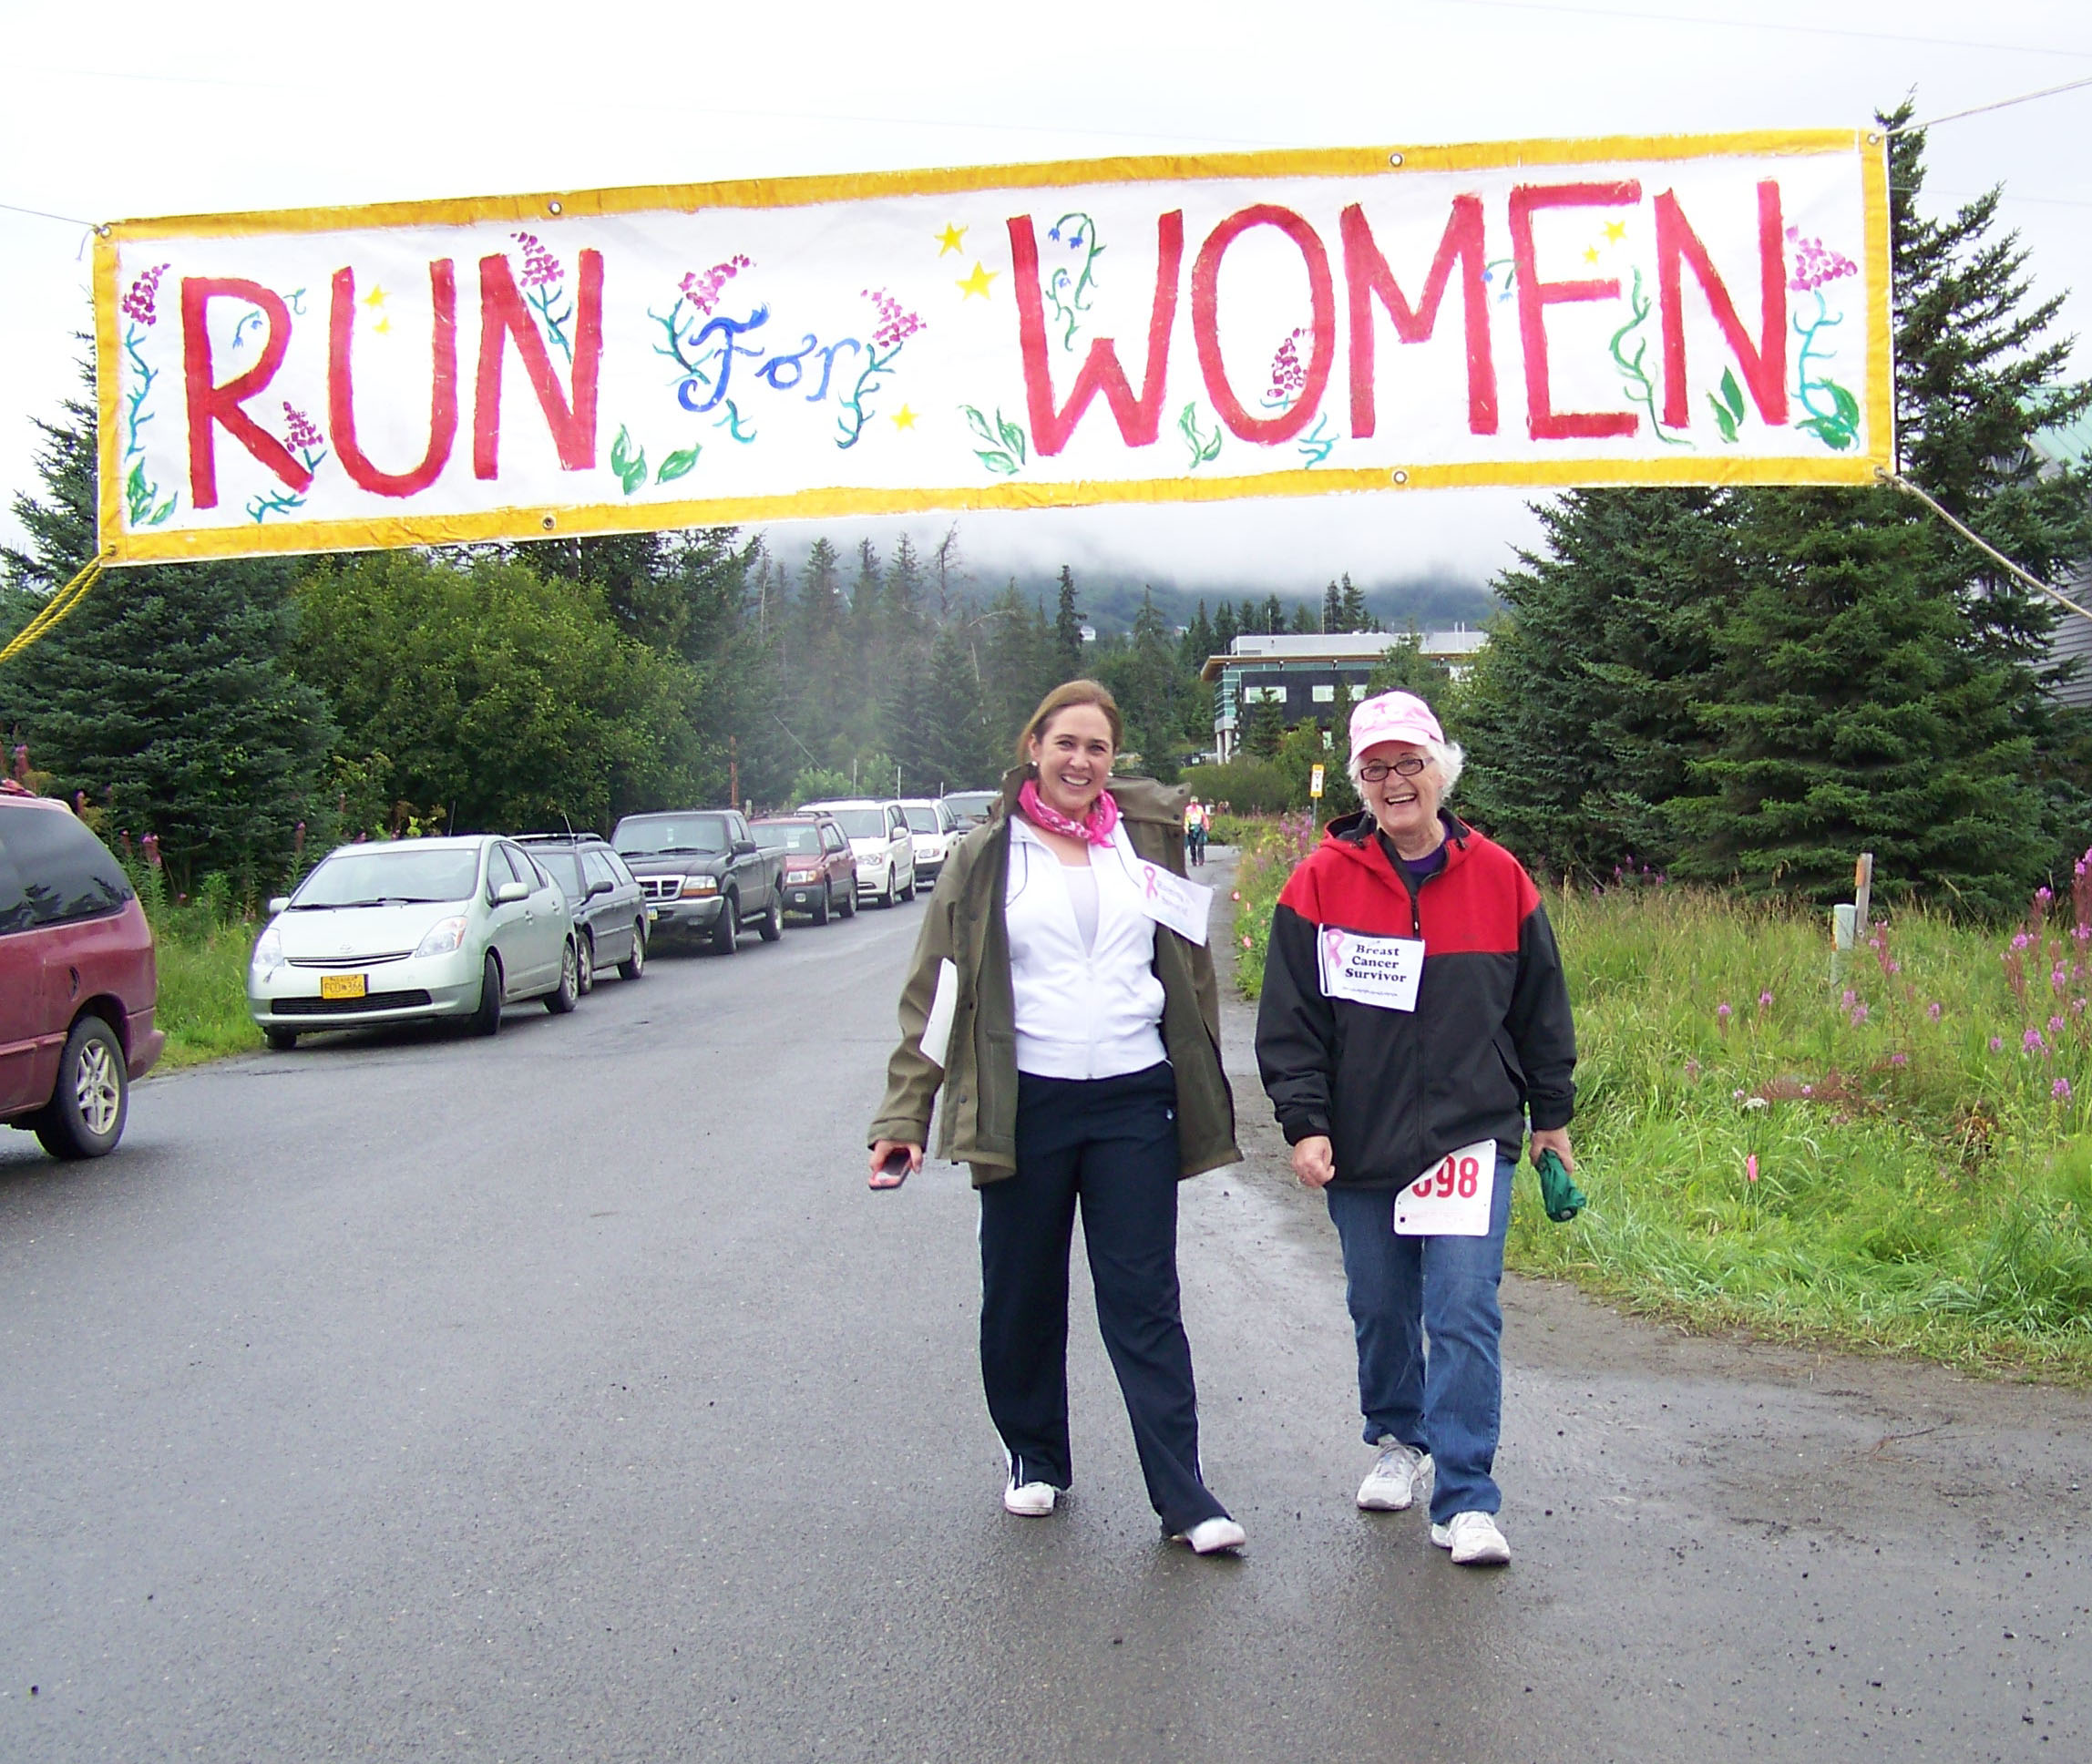 Breast cancer survivors Mary Johnson and Connie Prouty cross the finish line after completing the one-mile walk of Sunday's Breast Cancer Run.-Photo by McKibben Jackinsky,  Homer News